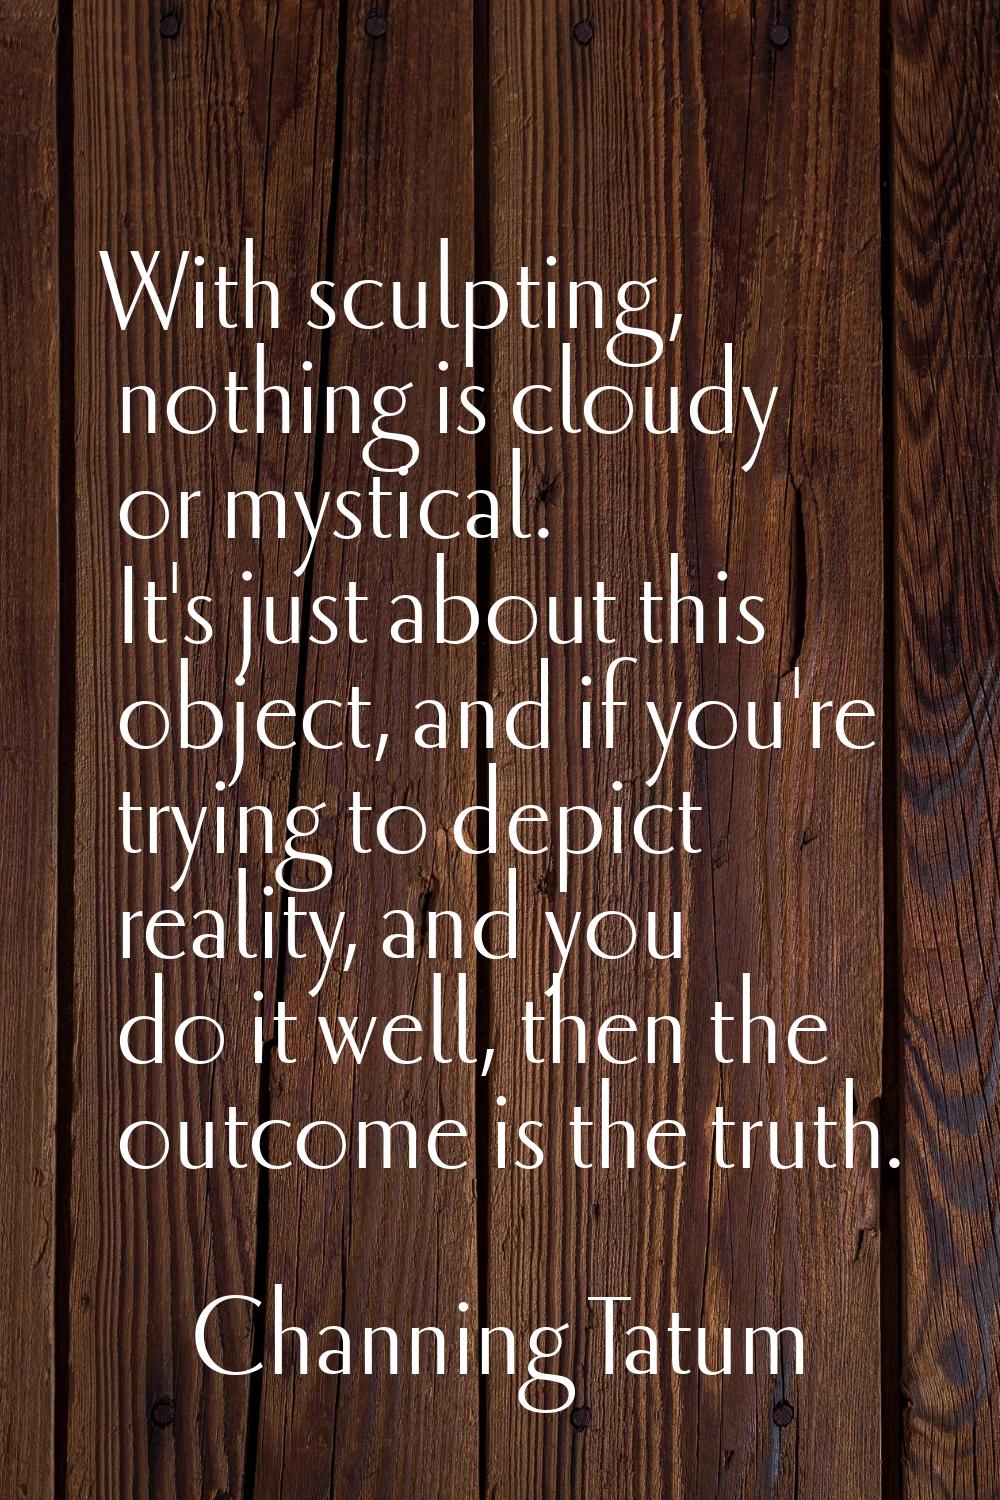 With sculpting, nothing is cloudy or mystical. It's just about this object, and if you're trying to